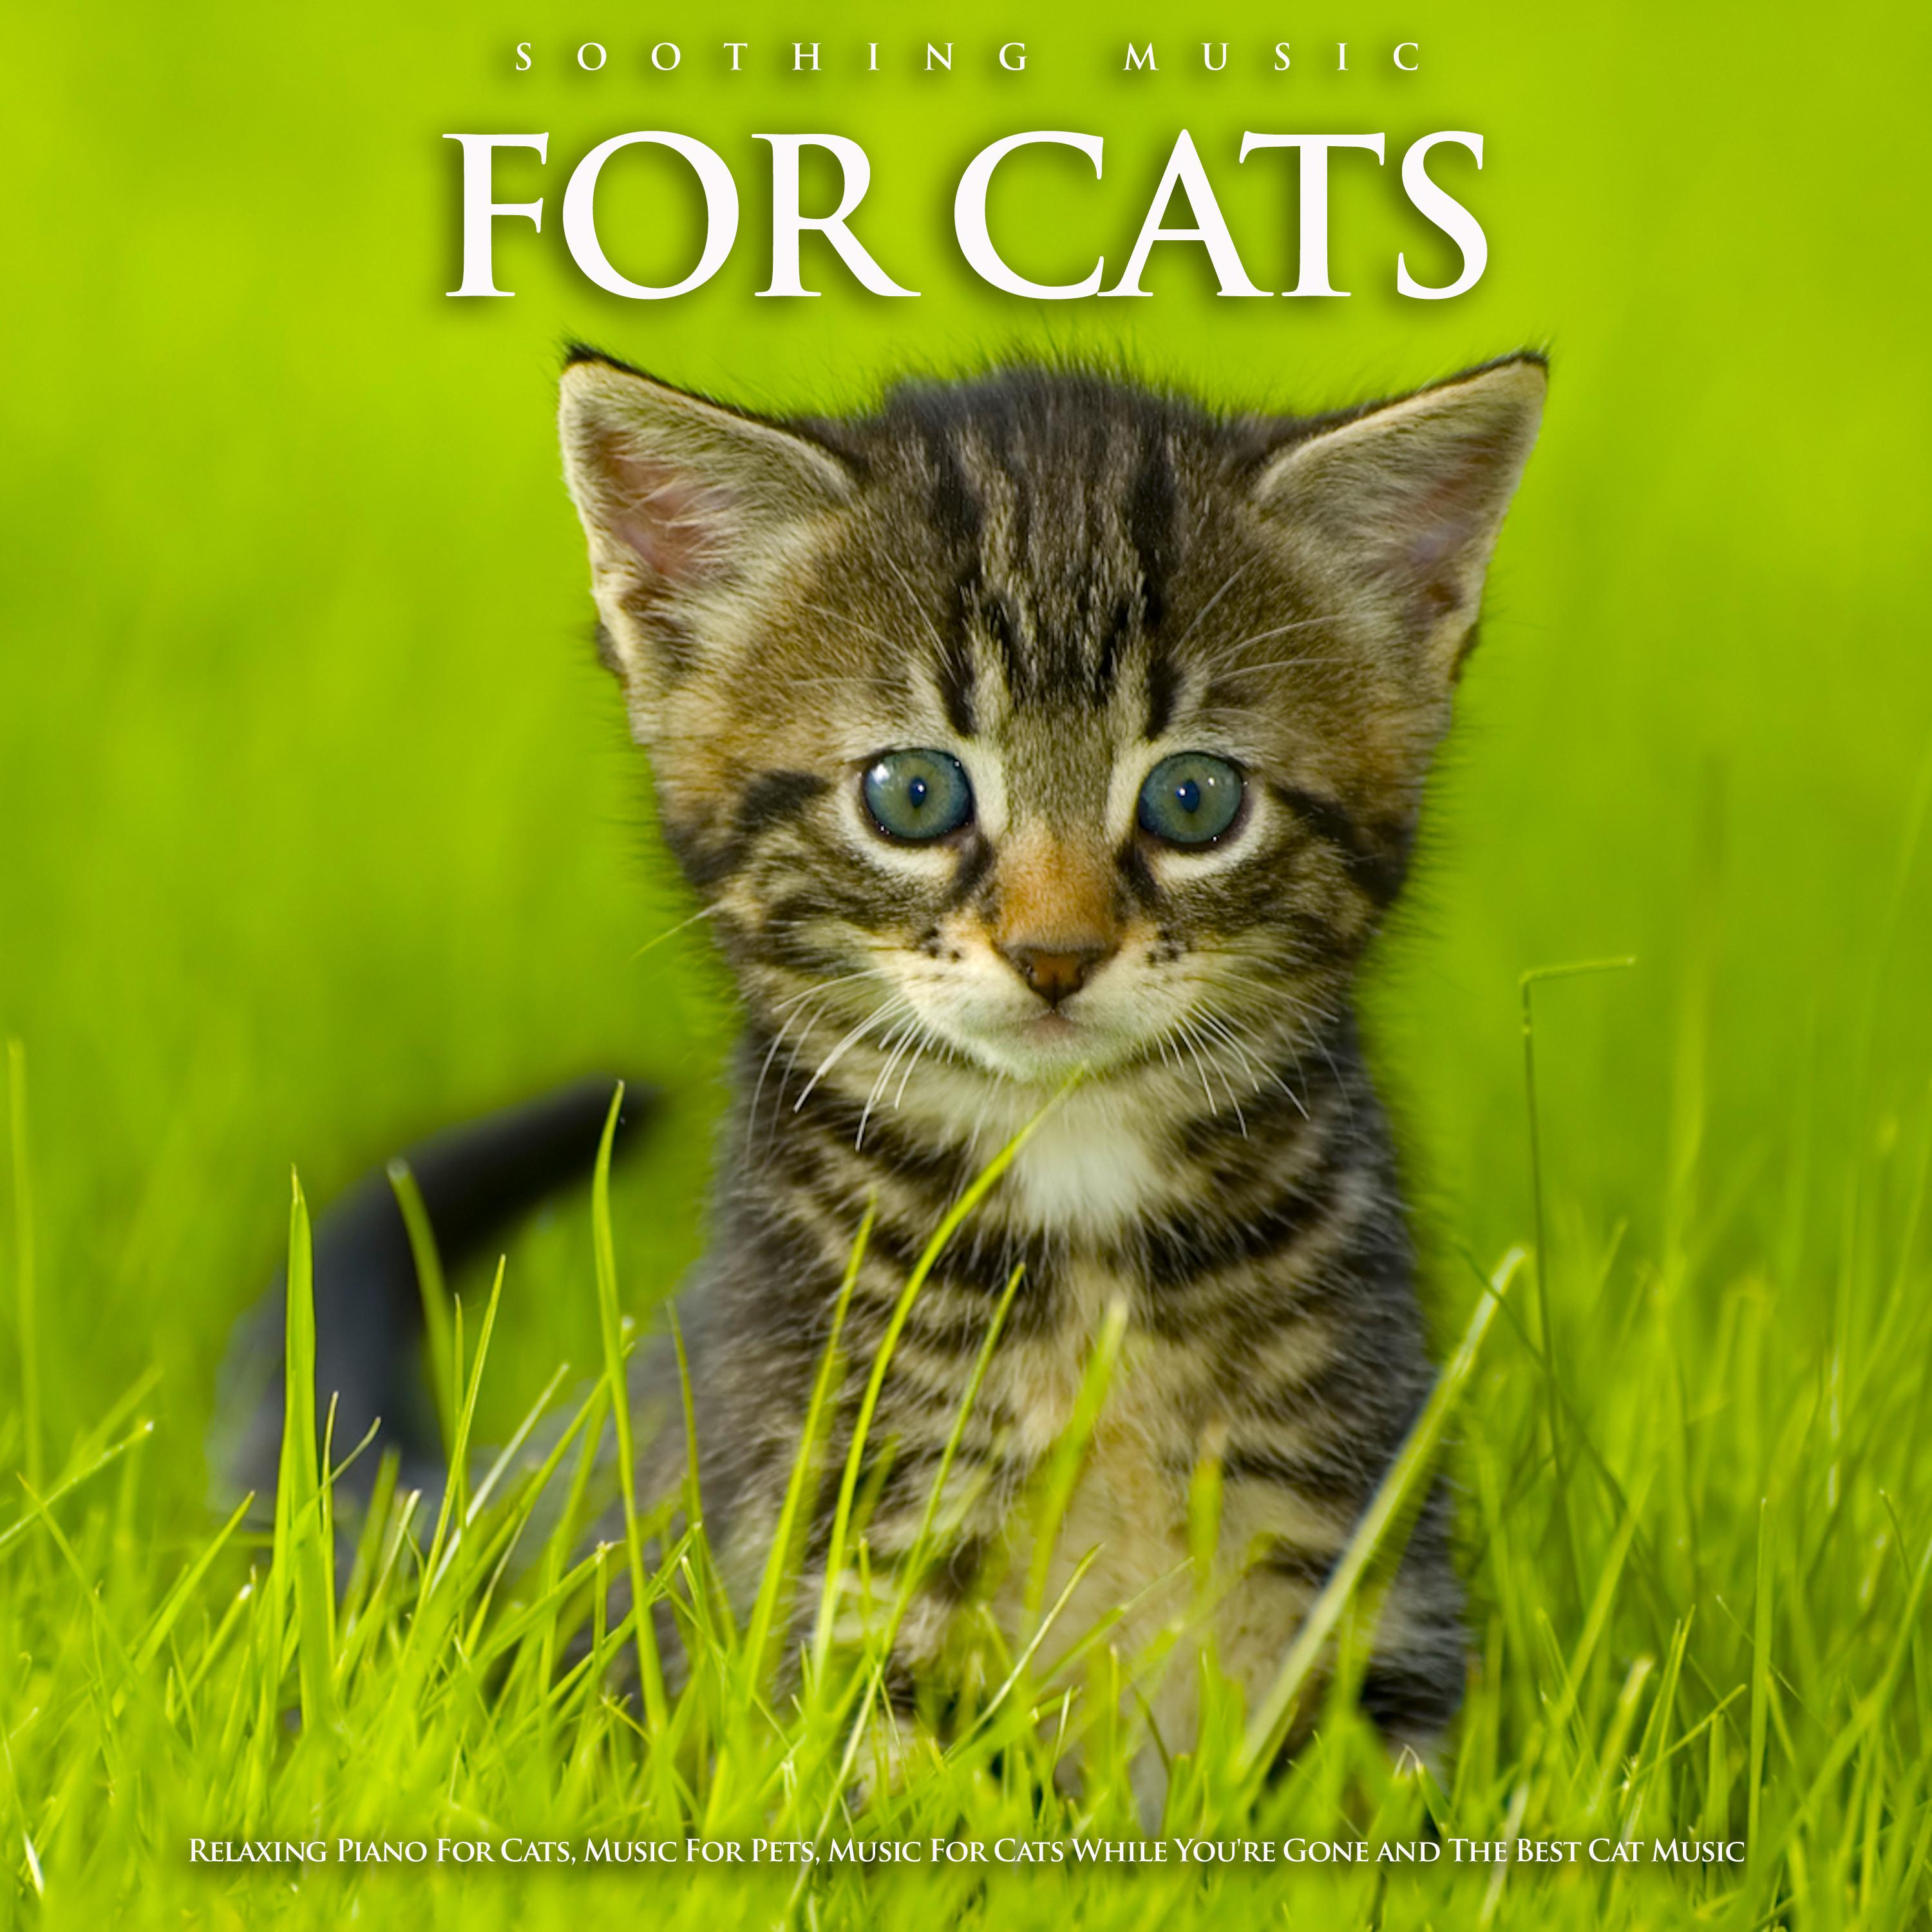 Soothing Music For Cats: Relaxing Piano For Cats, Music For Pets, Music For Cats While You're Gone and The Best Cat Music